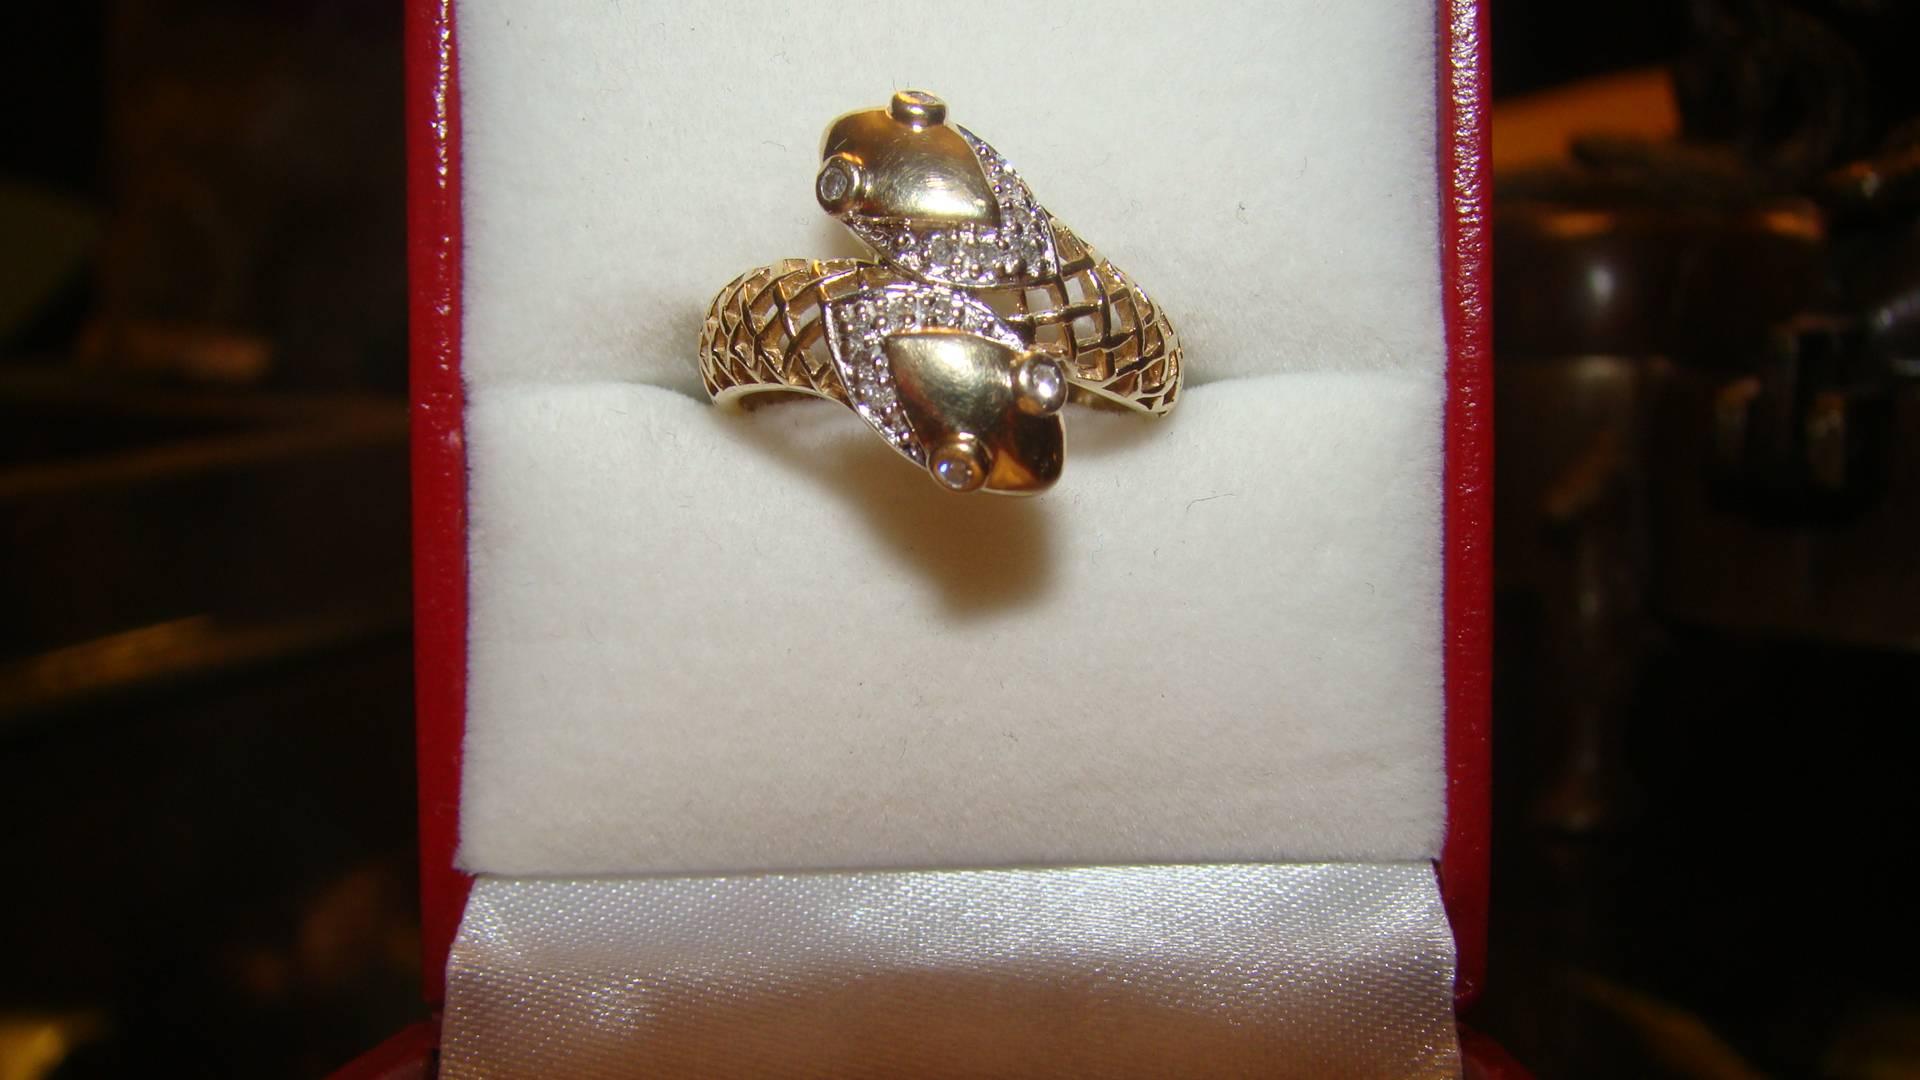 Beautiful Art Deco antique 14-karat yellow gold double headed snake ring with diamond eyes and diamond scales along both heads. The ring is a size 5.5. Diamonds are vintage and real with bright shine. Truly a beautiful snake ring in person.